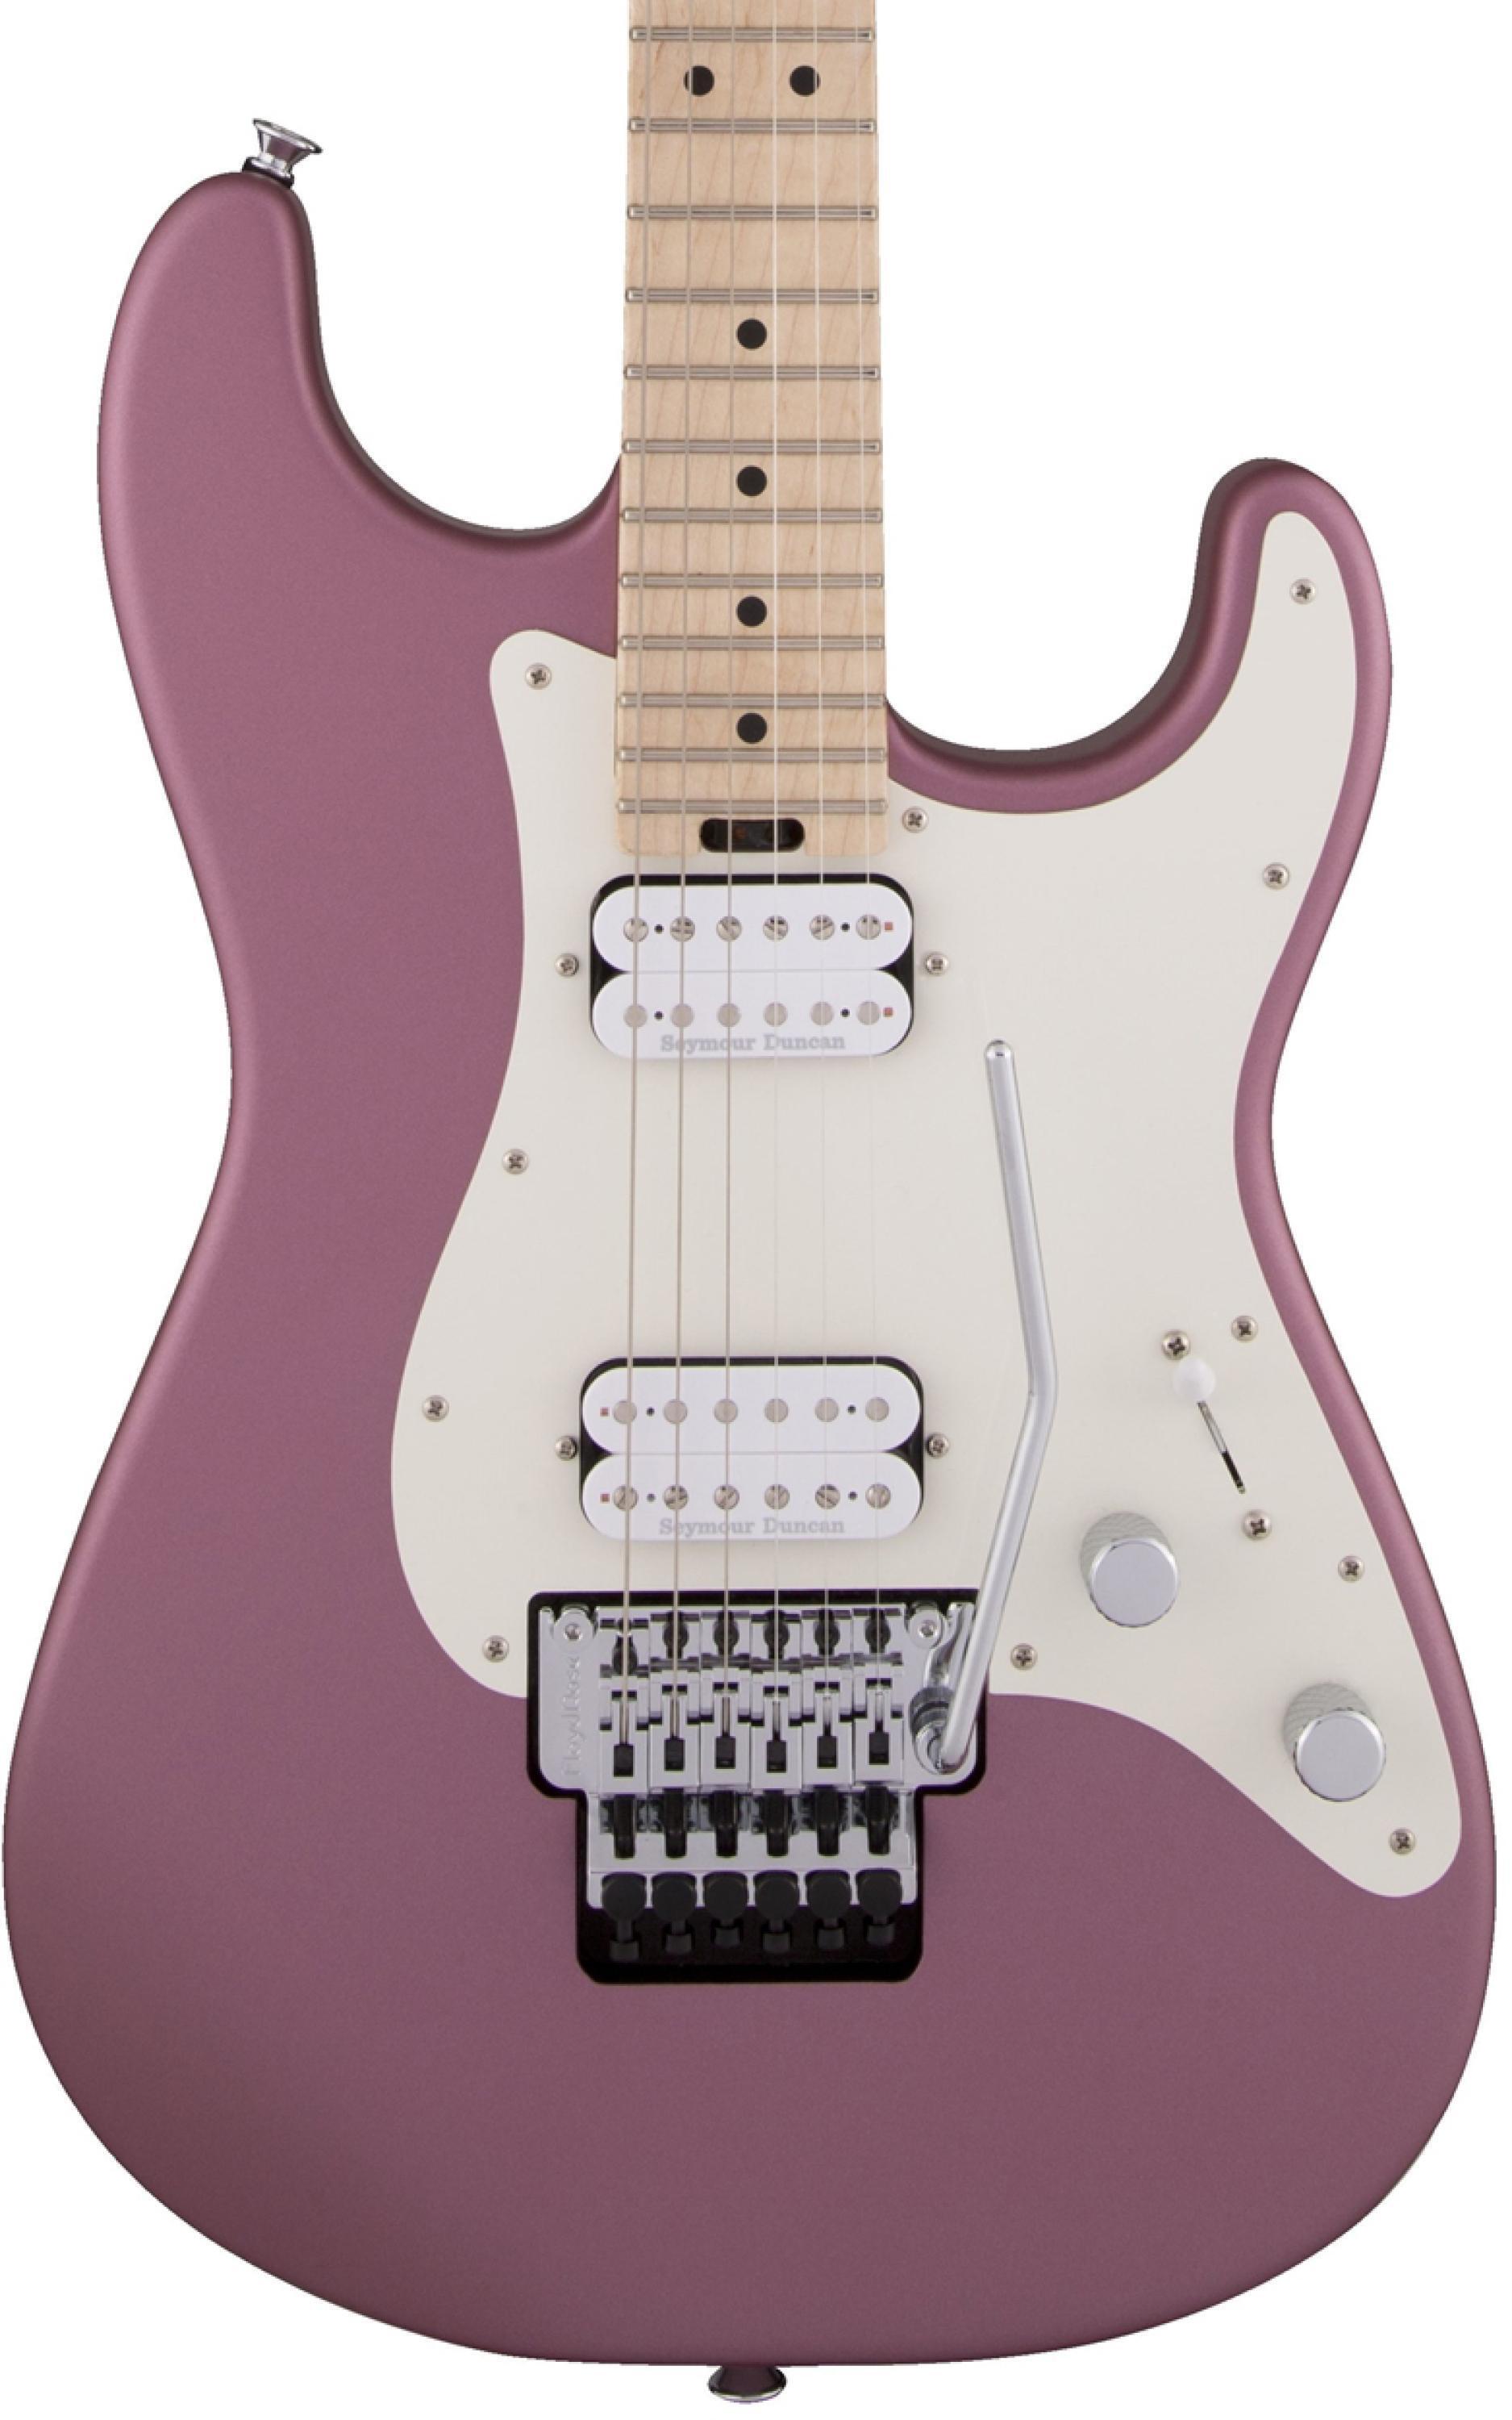 HH Mist Sweetwater M Satin | 1 So-Cal - Pro-Mod FR Charvel Style Burgundy